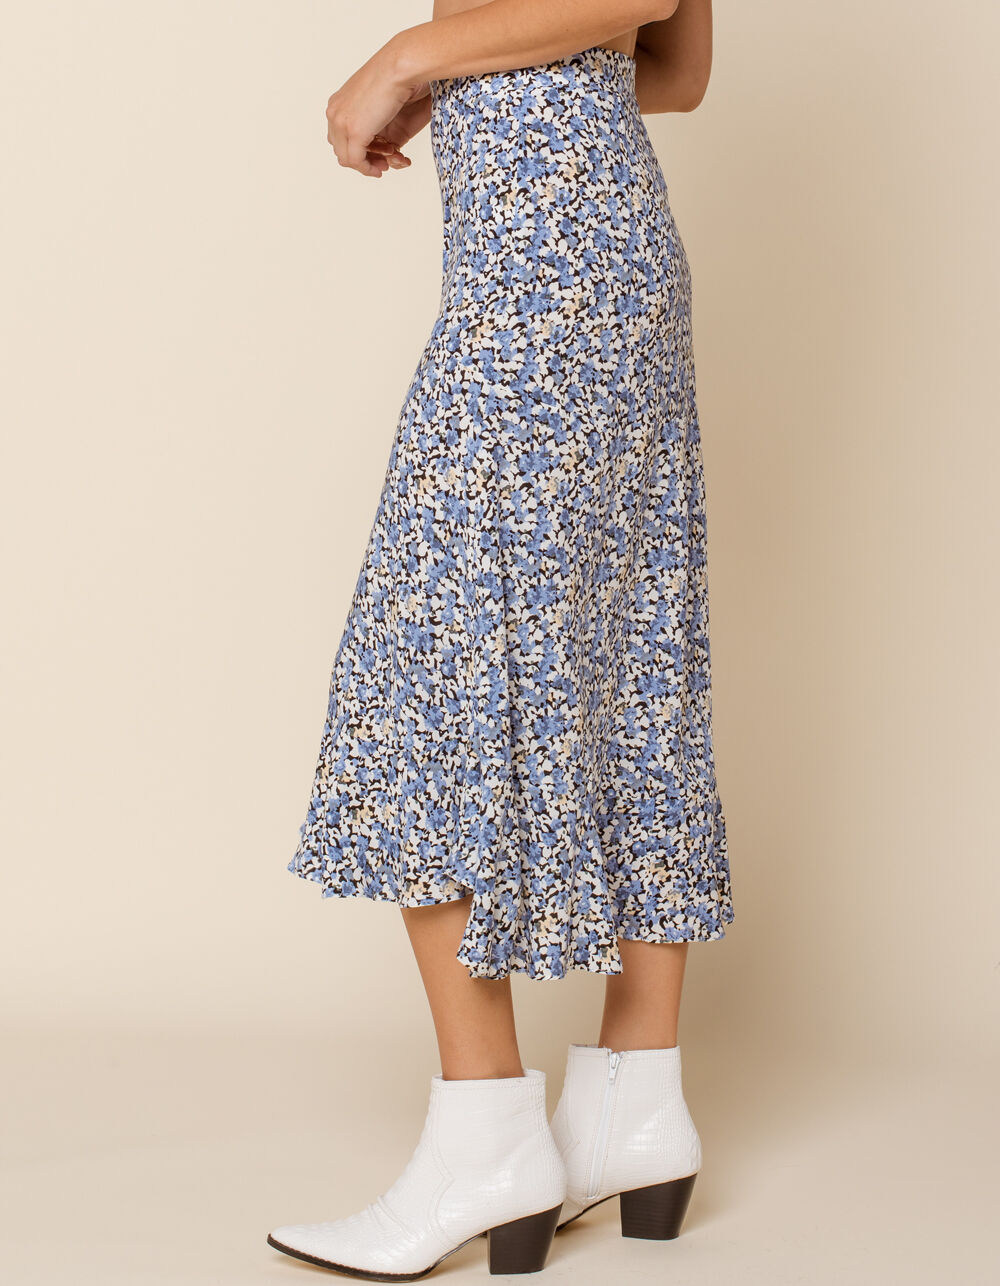 WEST OF MELROSE Whoops A Daisy Floral Midi Skirt - BLUE COMBO | Tillys